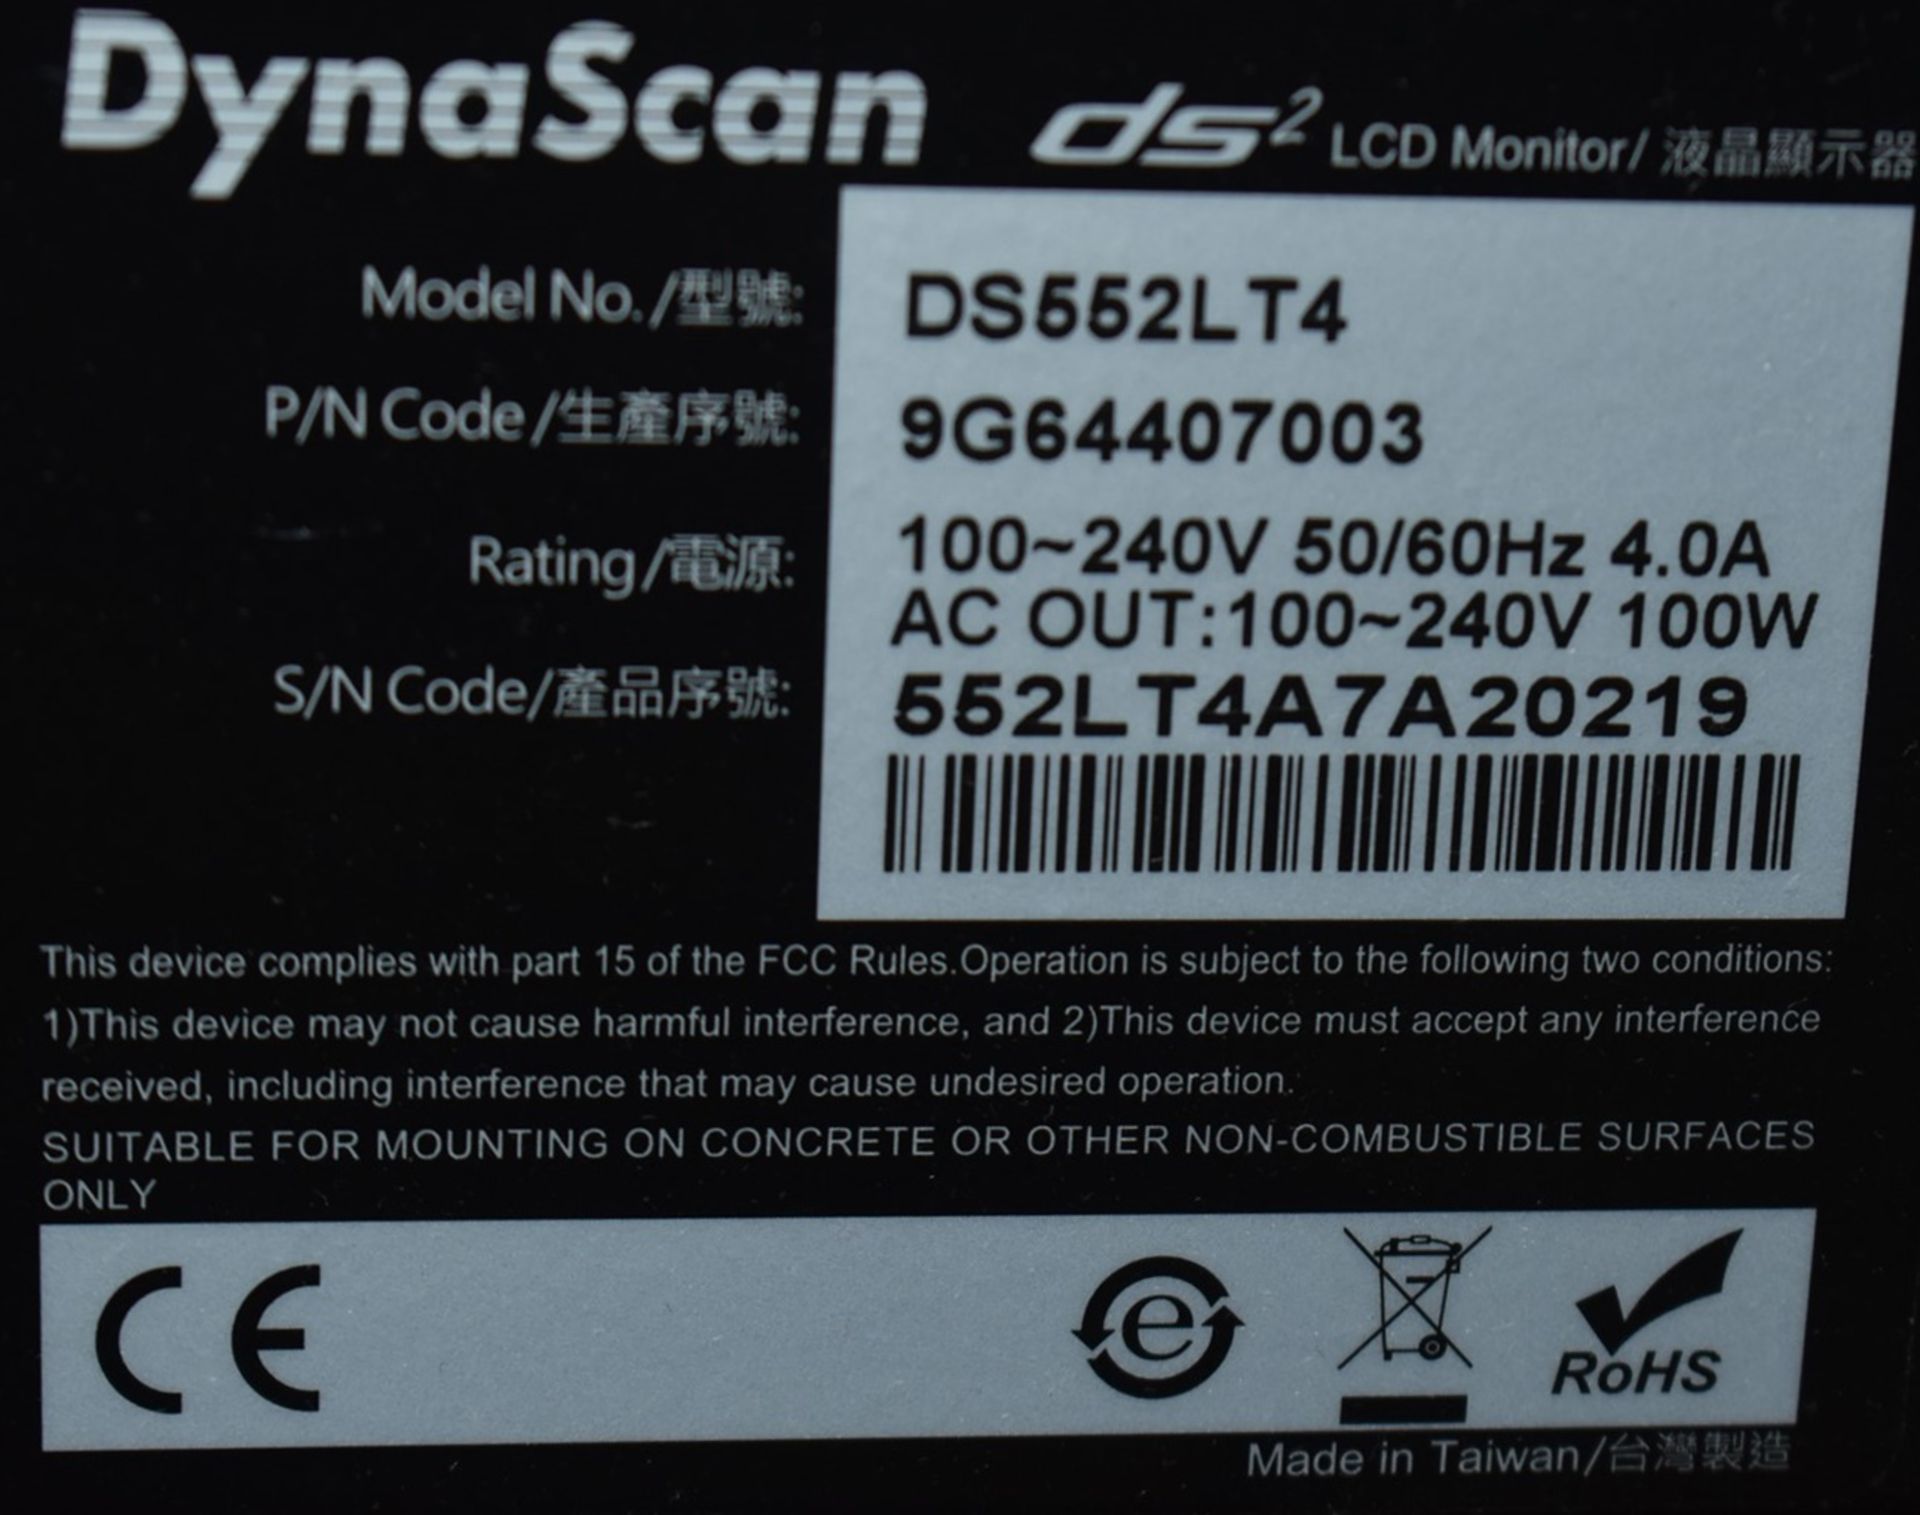 1 x DynaScan ds2 55 Inch LCD Fanless Monitor With Security Metal Enclosure and Signature Book IPC Sy - Image 2 of 10